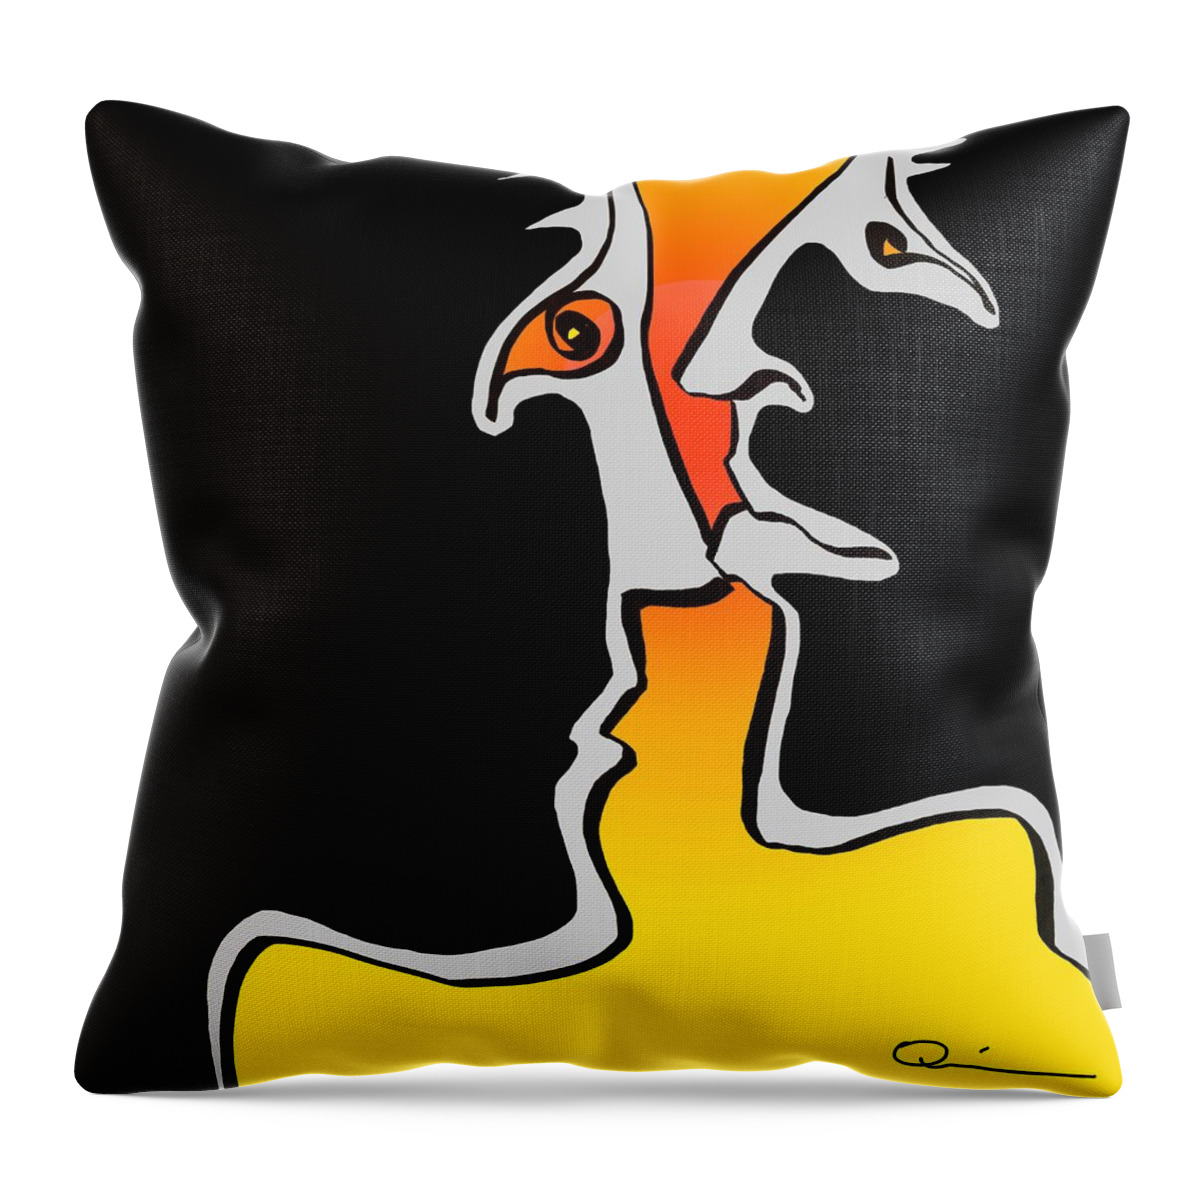 Quiros Throw Pillow featuring the digital art Candle by Jeffrey Quiros